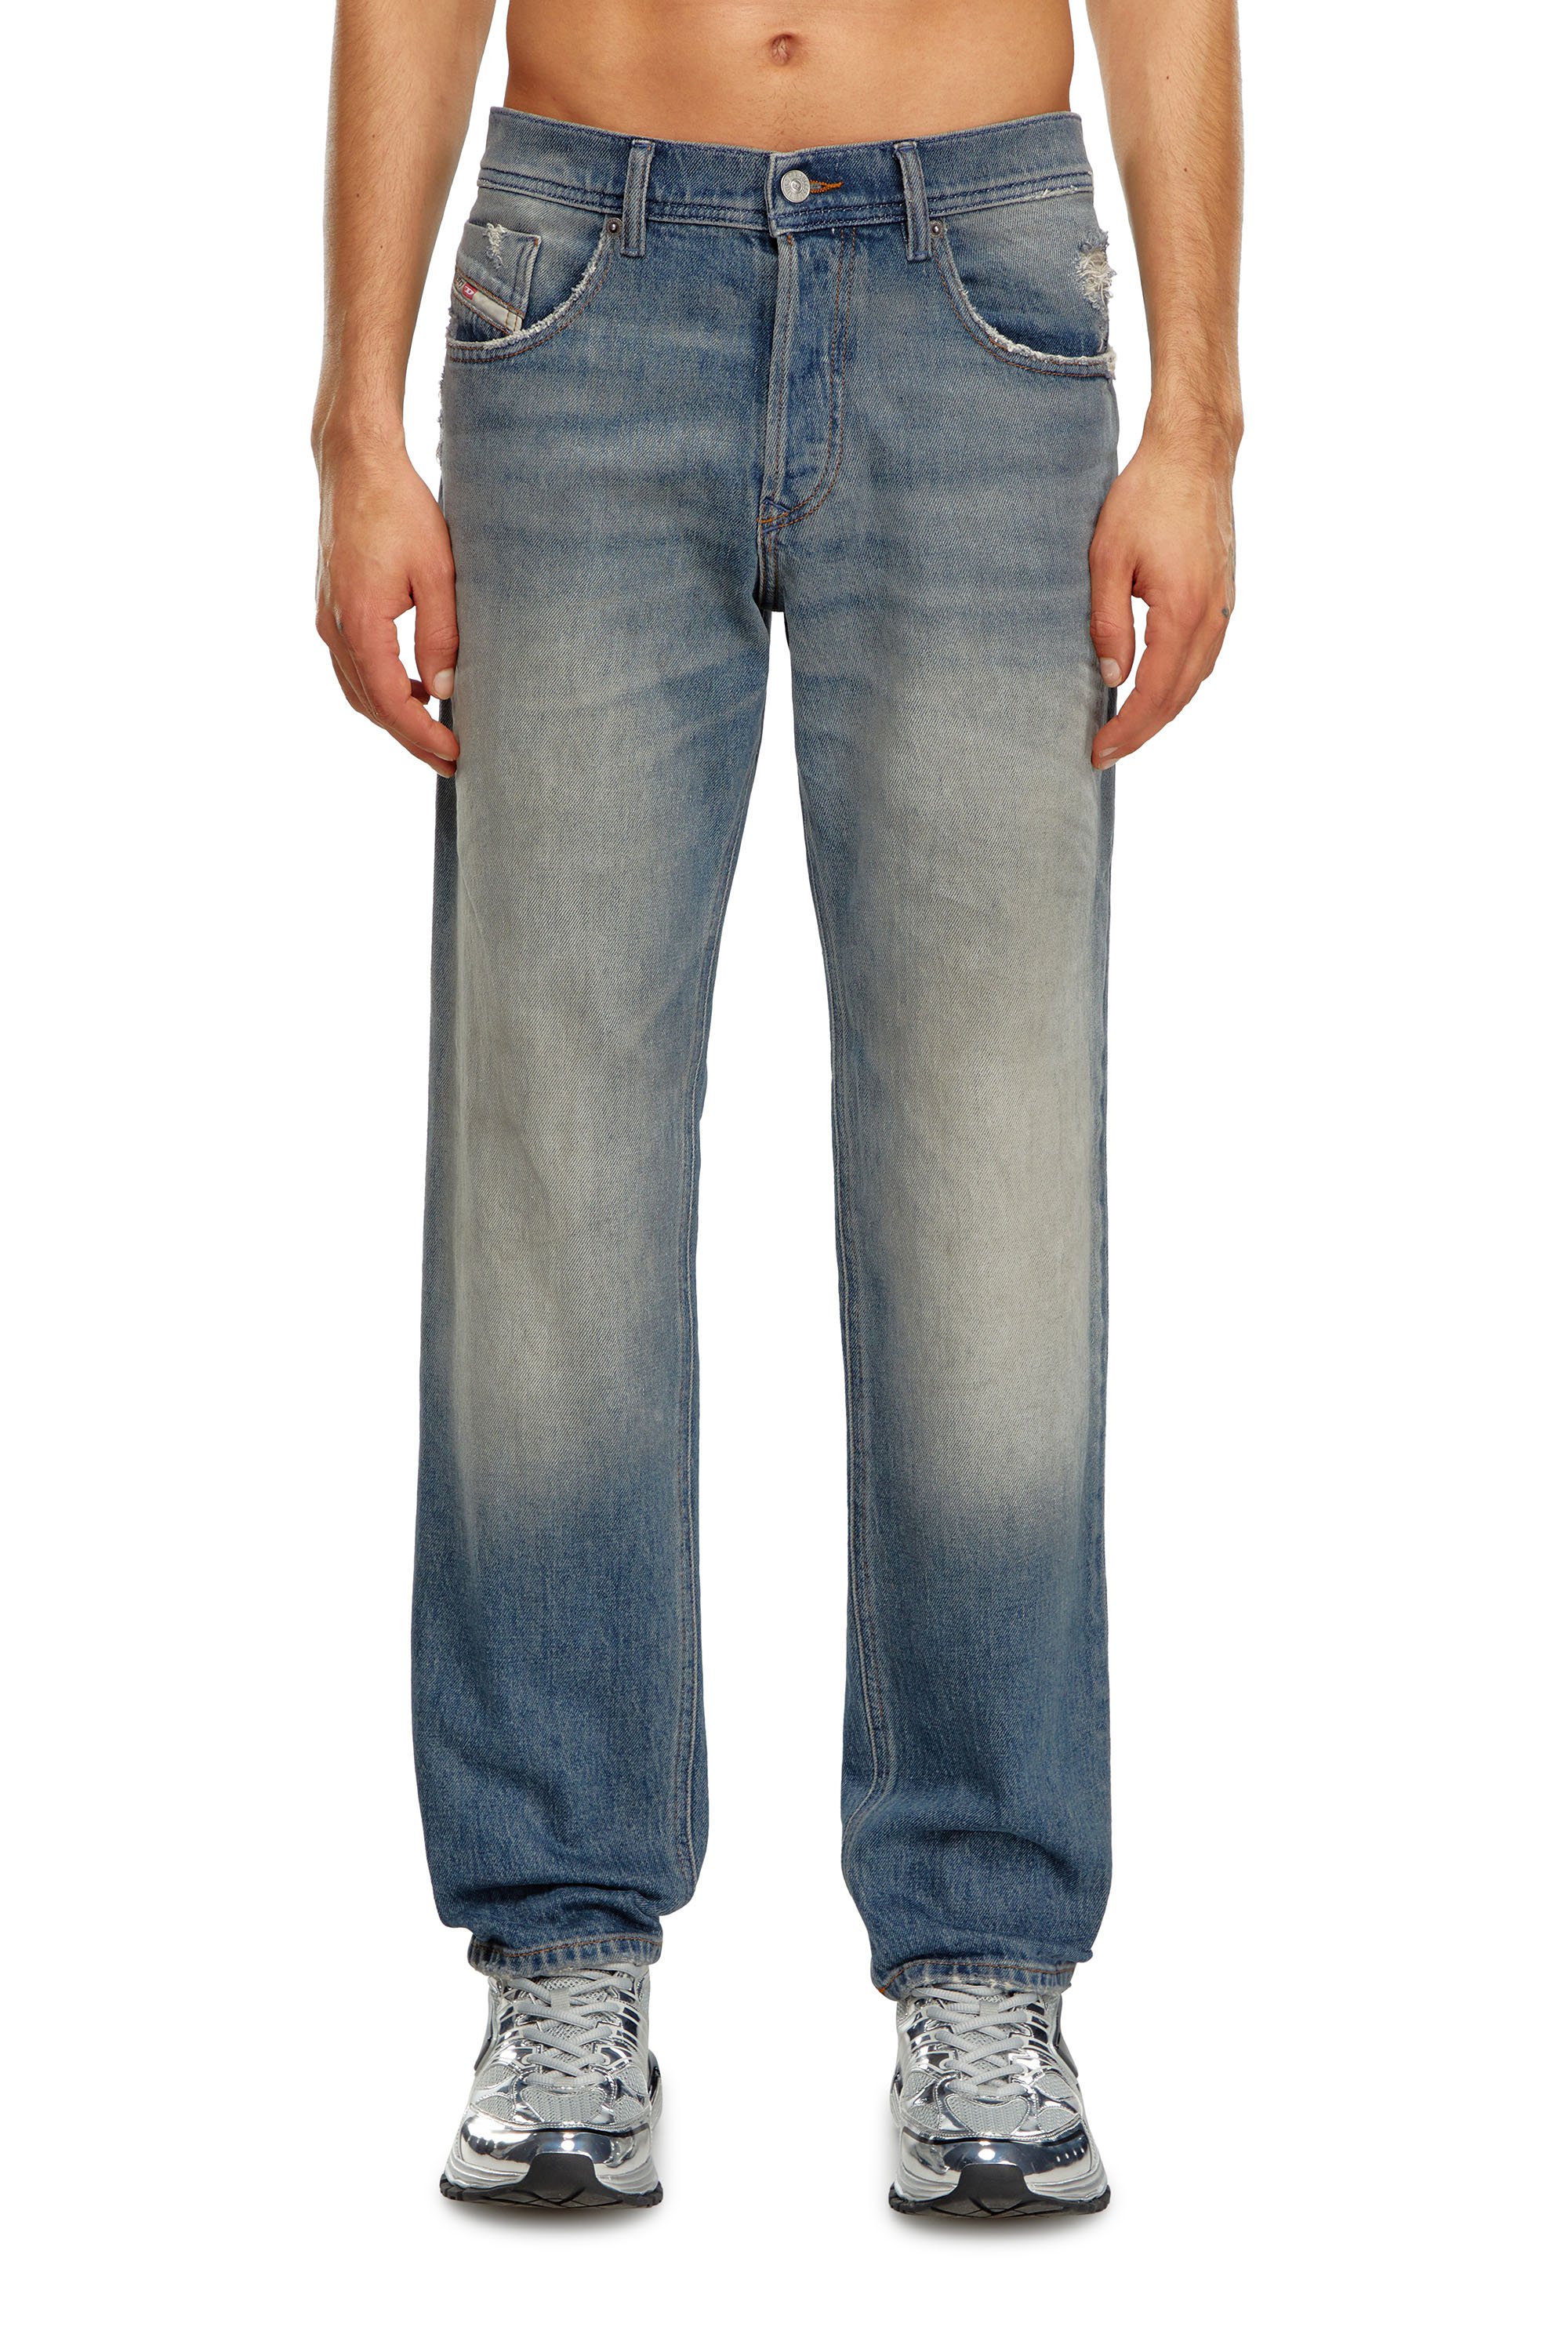 Diesel - Tapered Jeans 2023 D-Finitive 0GRDC, Hombre Tapered Jeans - 2023 D-Finitive in Azul marino - Image 1